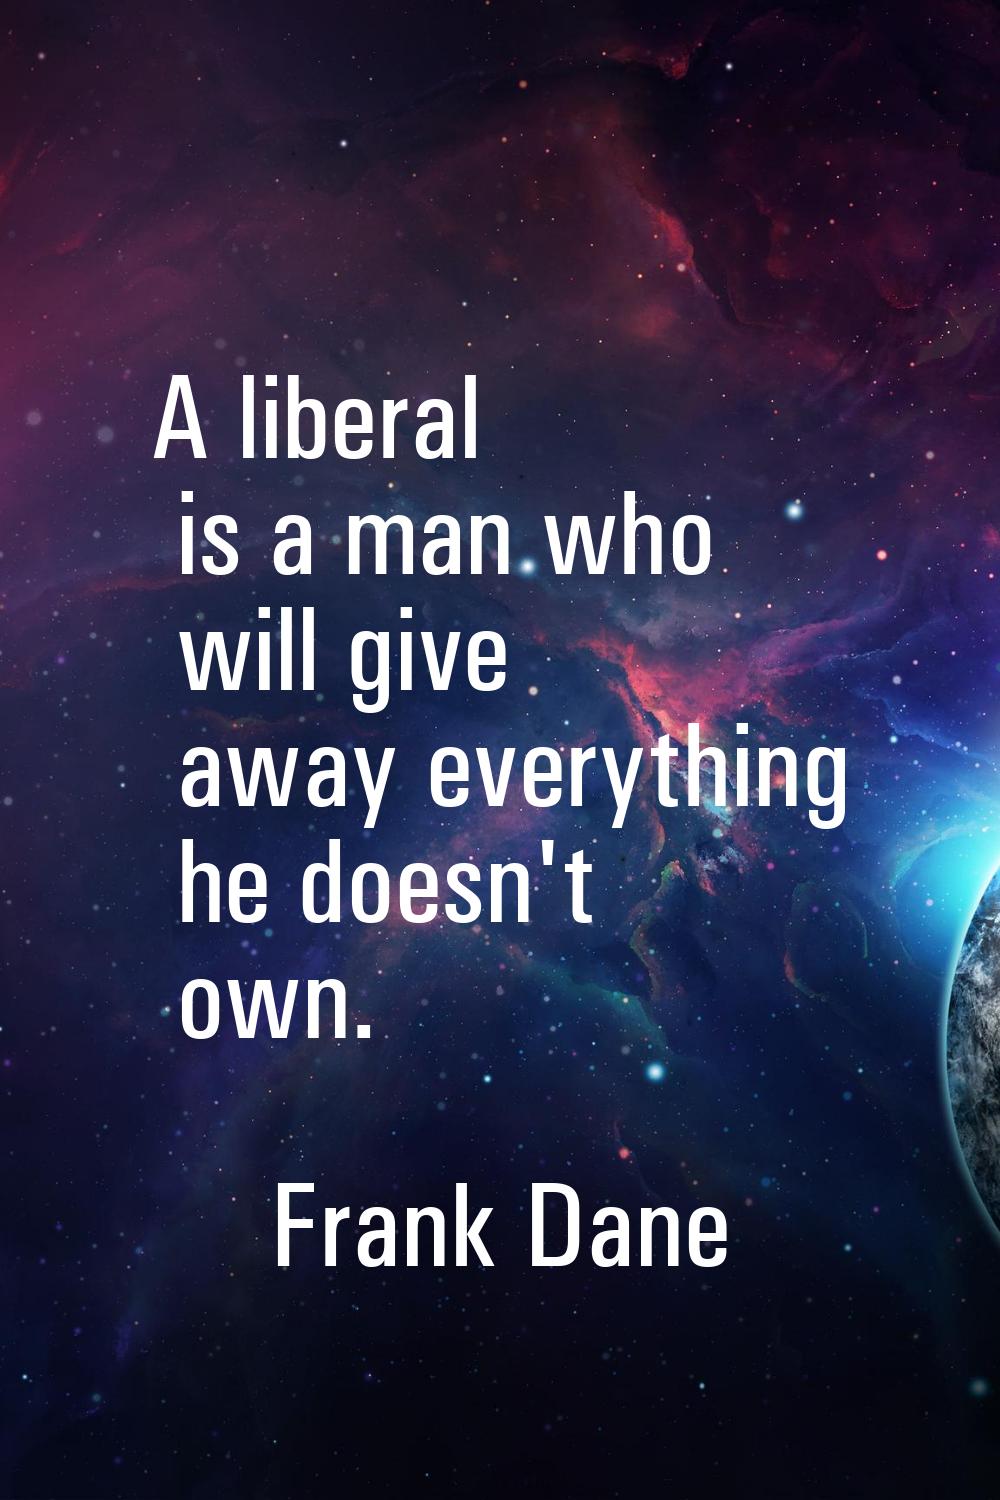 A liberal is a man who will give away everything he doesn't own.